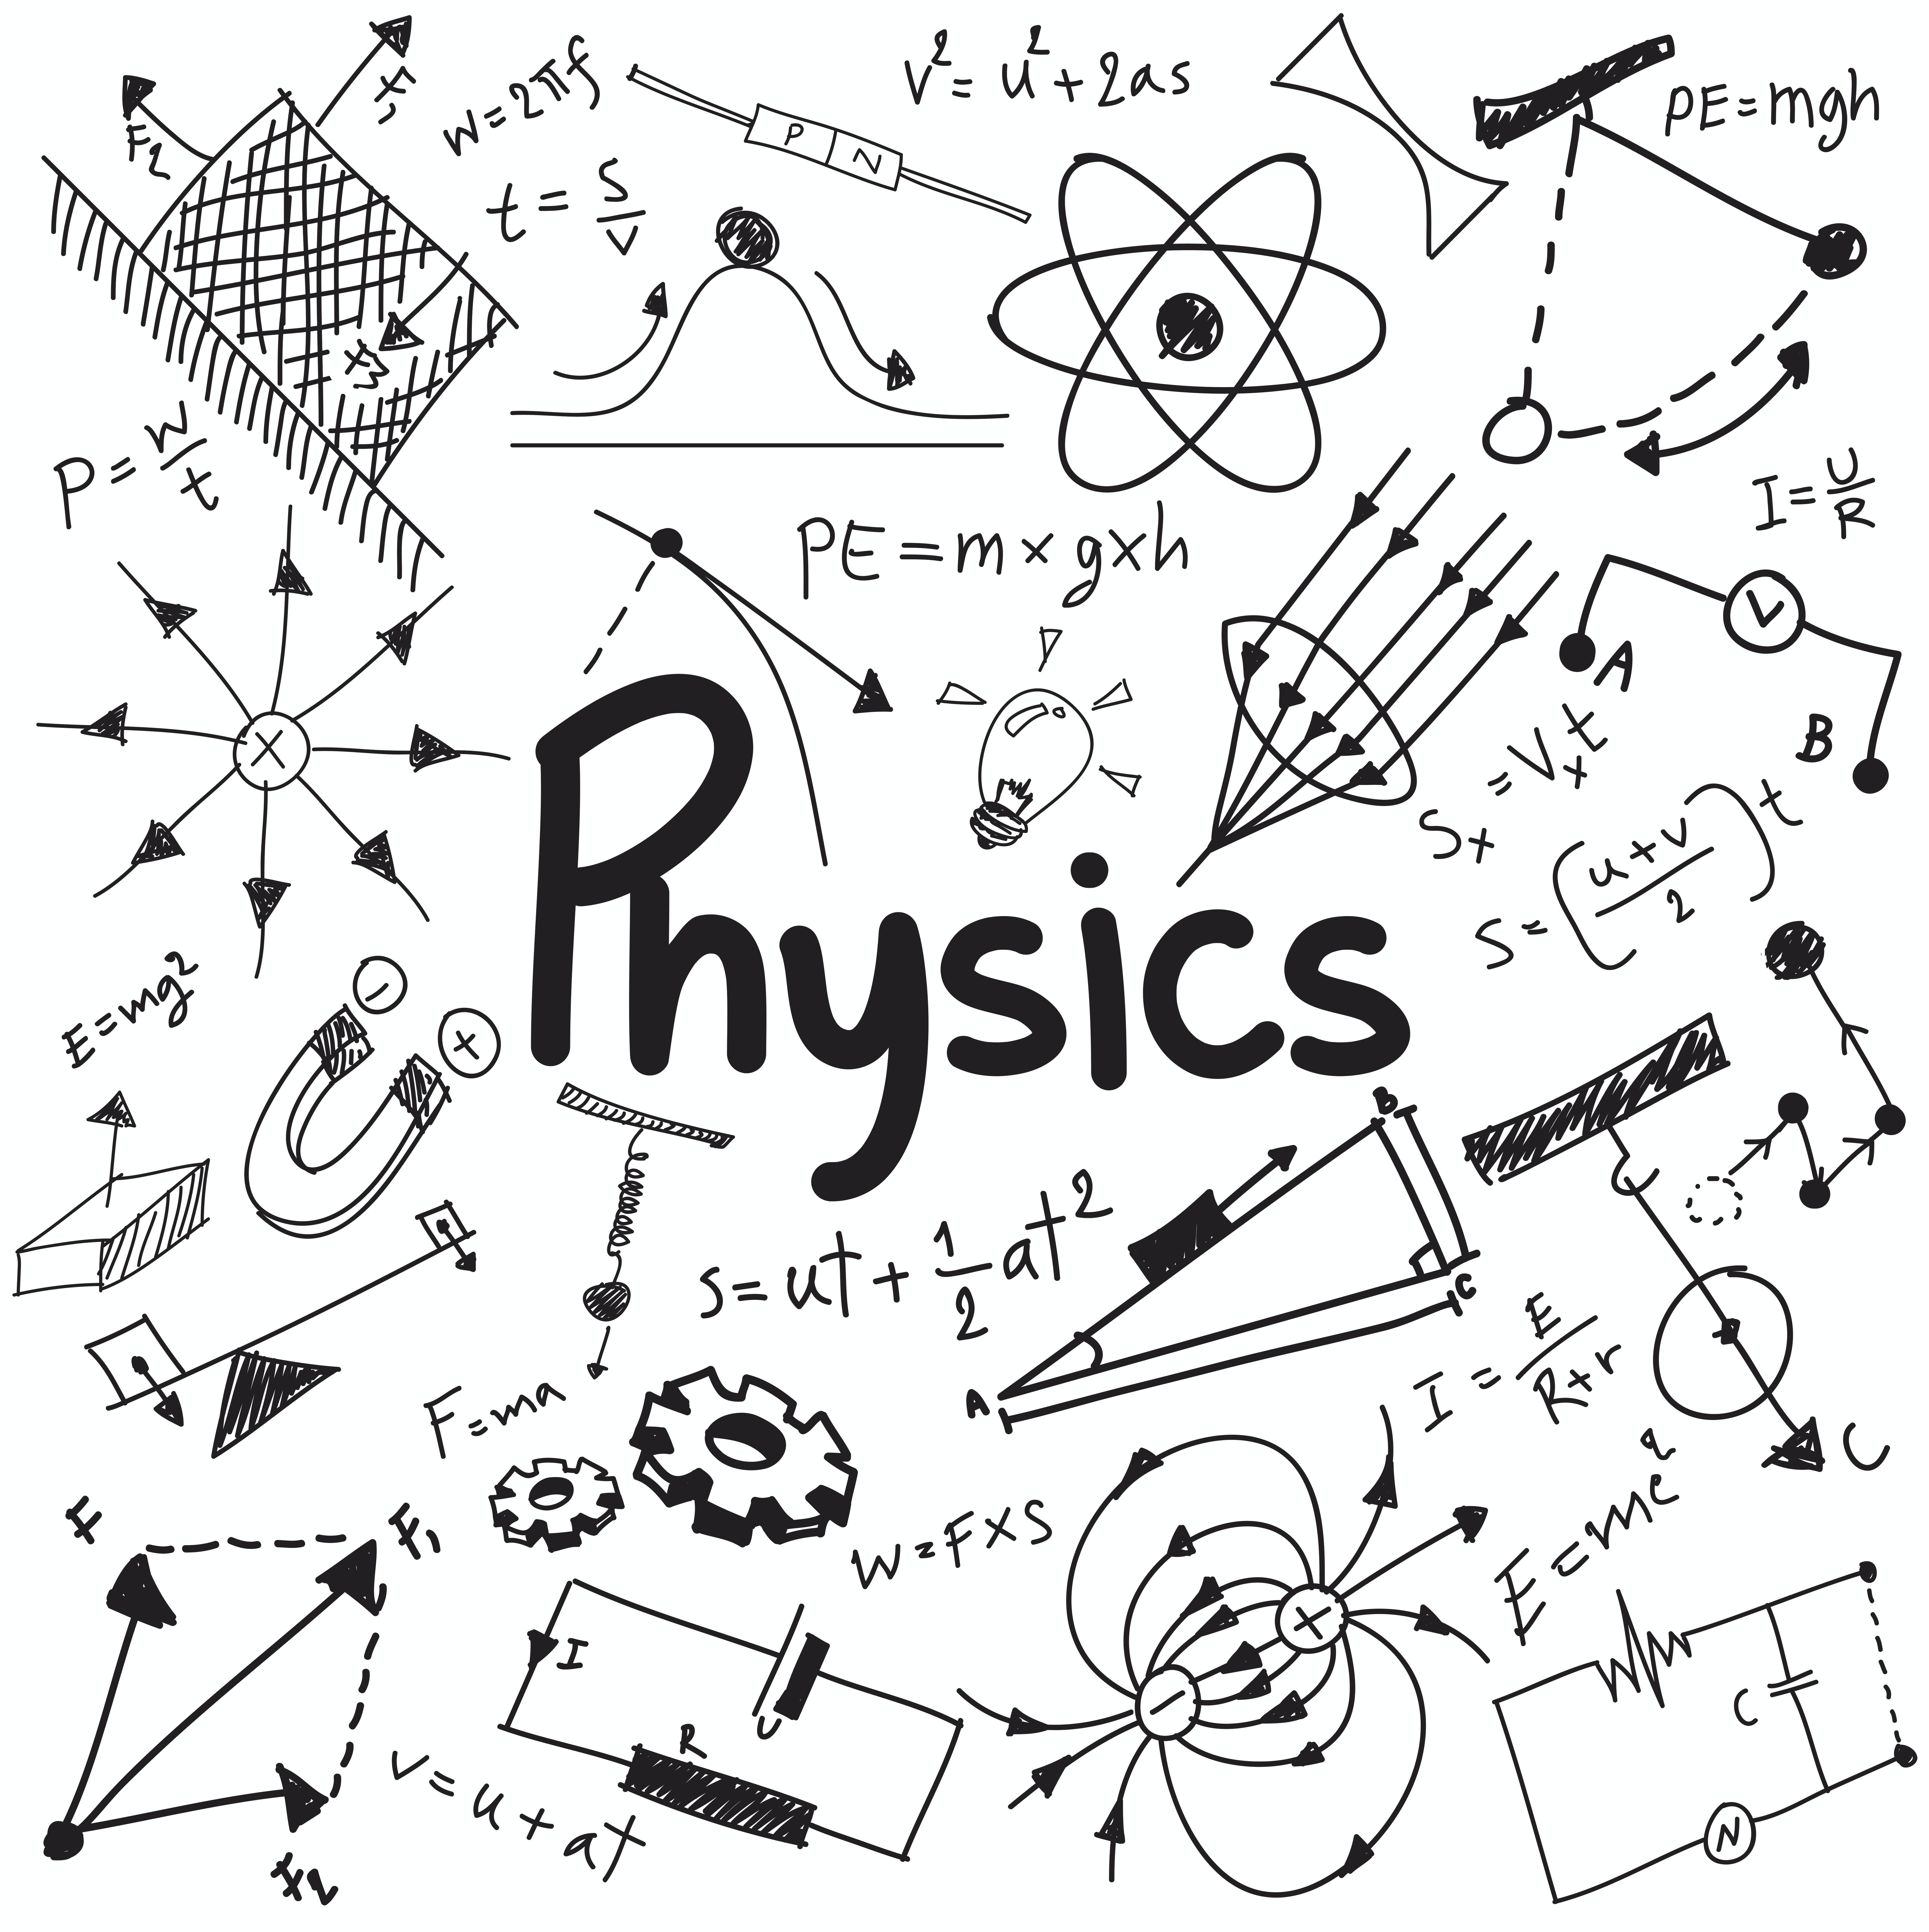 Physics is taught badly because teachers struggle with basic concepts